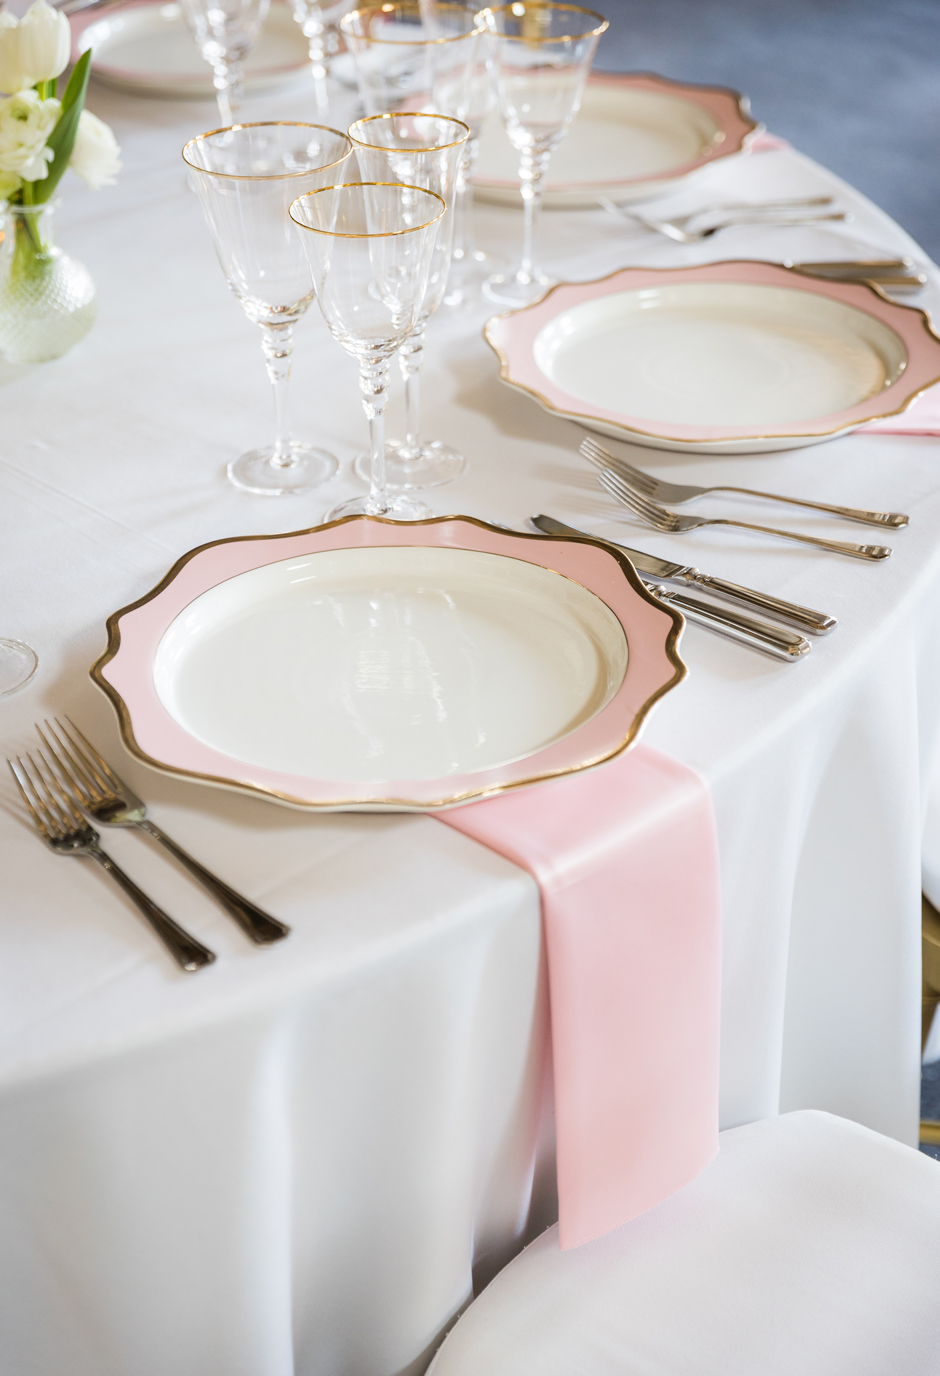 Pink & gold trim Porcelain charger plate with white Essential linen, blush Verona napkin & gold trim glasses.